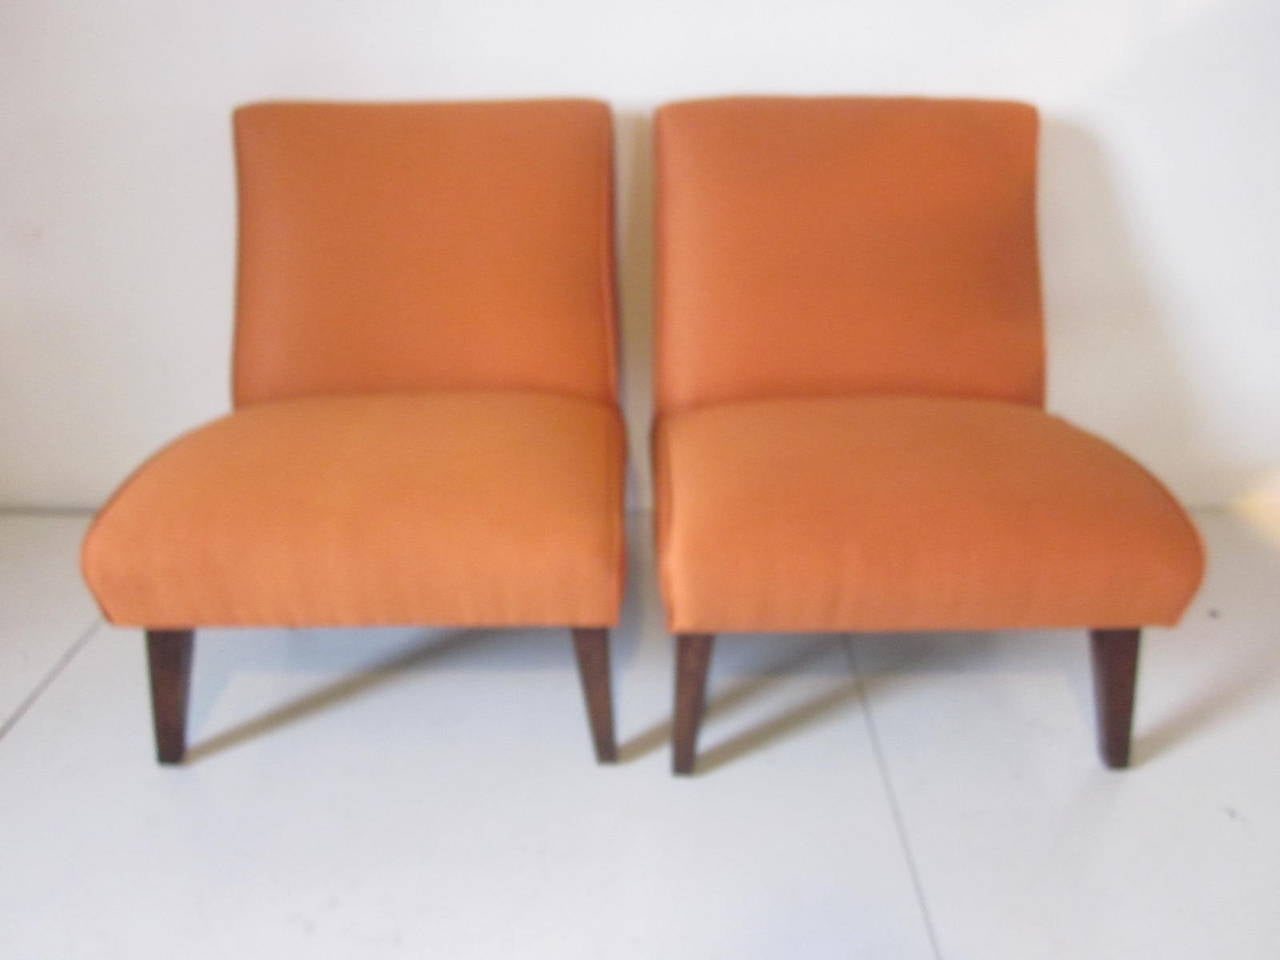 20th Century Slipper Chairs in the Manner of Grosfeld House